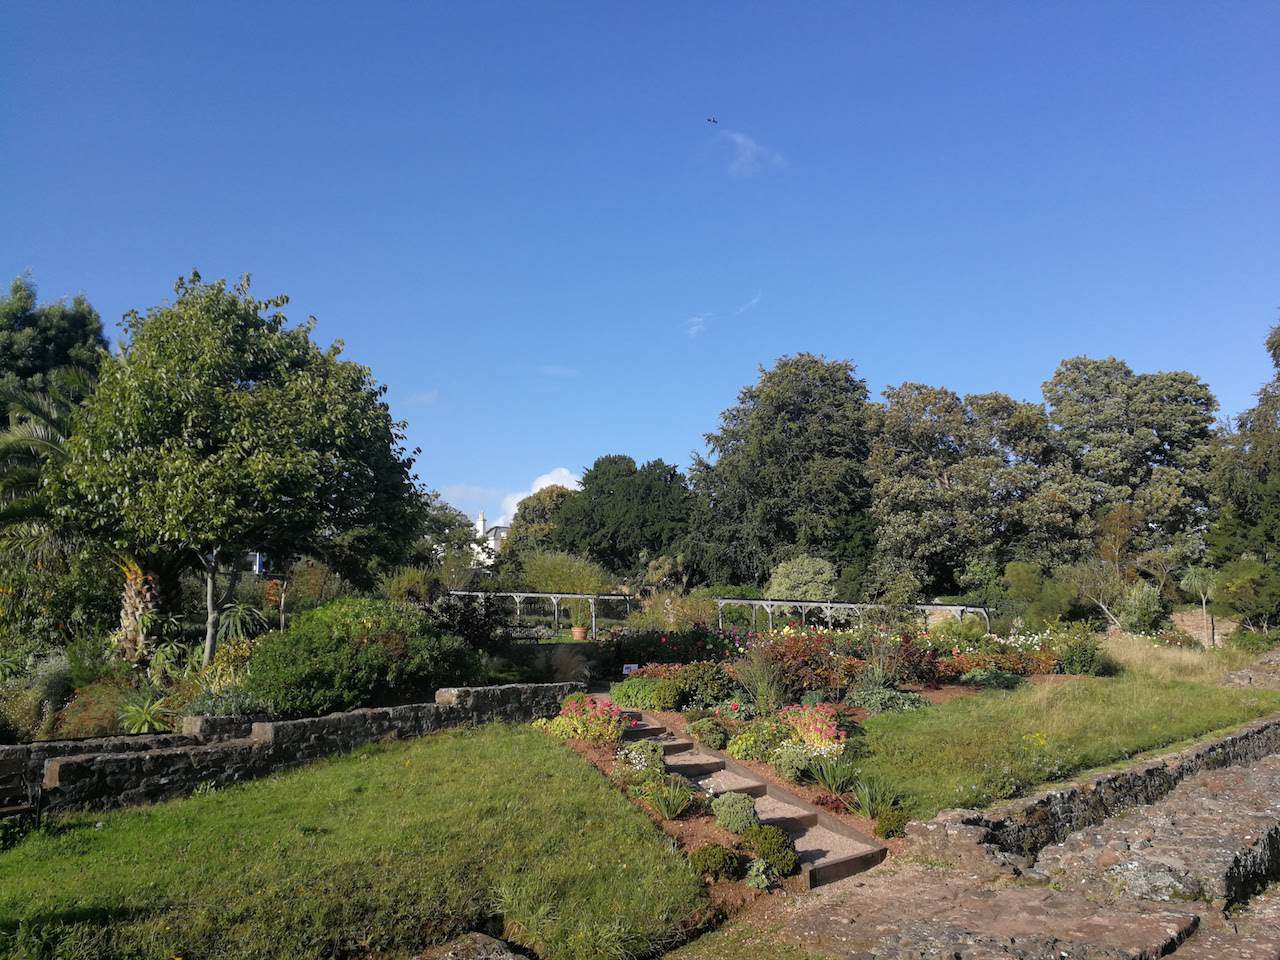 The gardens at Torre Abbey